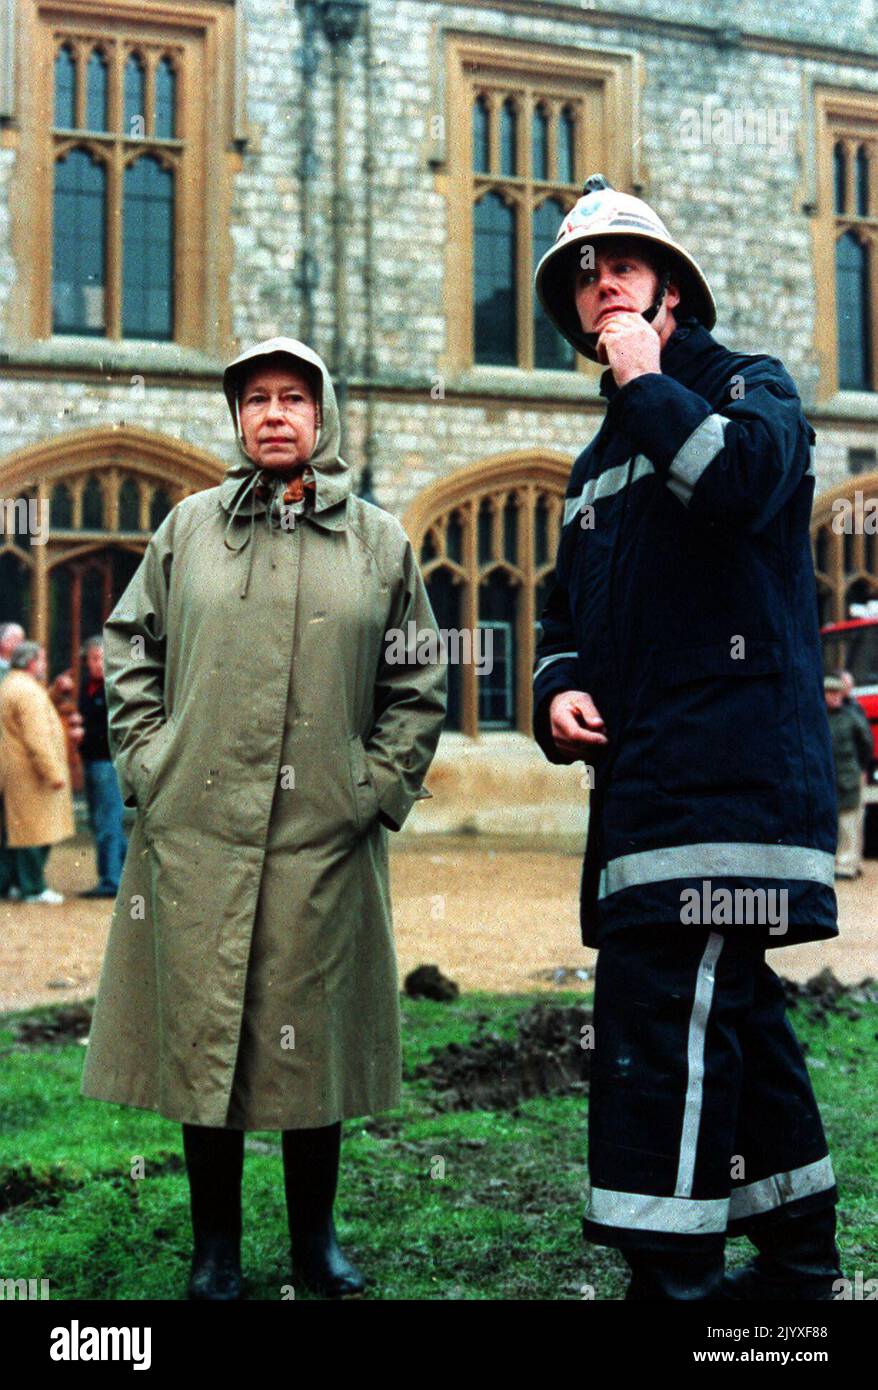 File photo dated 21/11/1992 of Queen Elizabeth II inspecting the ruins of Windsor castle with a fireman. The Queen's Annus Horribilis speech at Guildhall on 24 November, 1992, marking 40 years on the throne, followed a year which had seen the Prince and Princess of Wales at war, the Duke and Duchess of York separated, Princess Anne divorced, Windsor Castle went up in flames and the publication of Andrew Morton's book: 'Diana: Her True Story'. In December the Prince and Princess of Wales formally separated. Issue date: Thursday September 8, 2022. Stock Photo